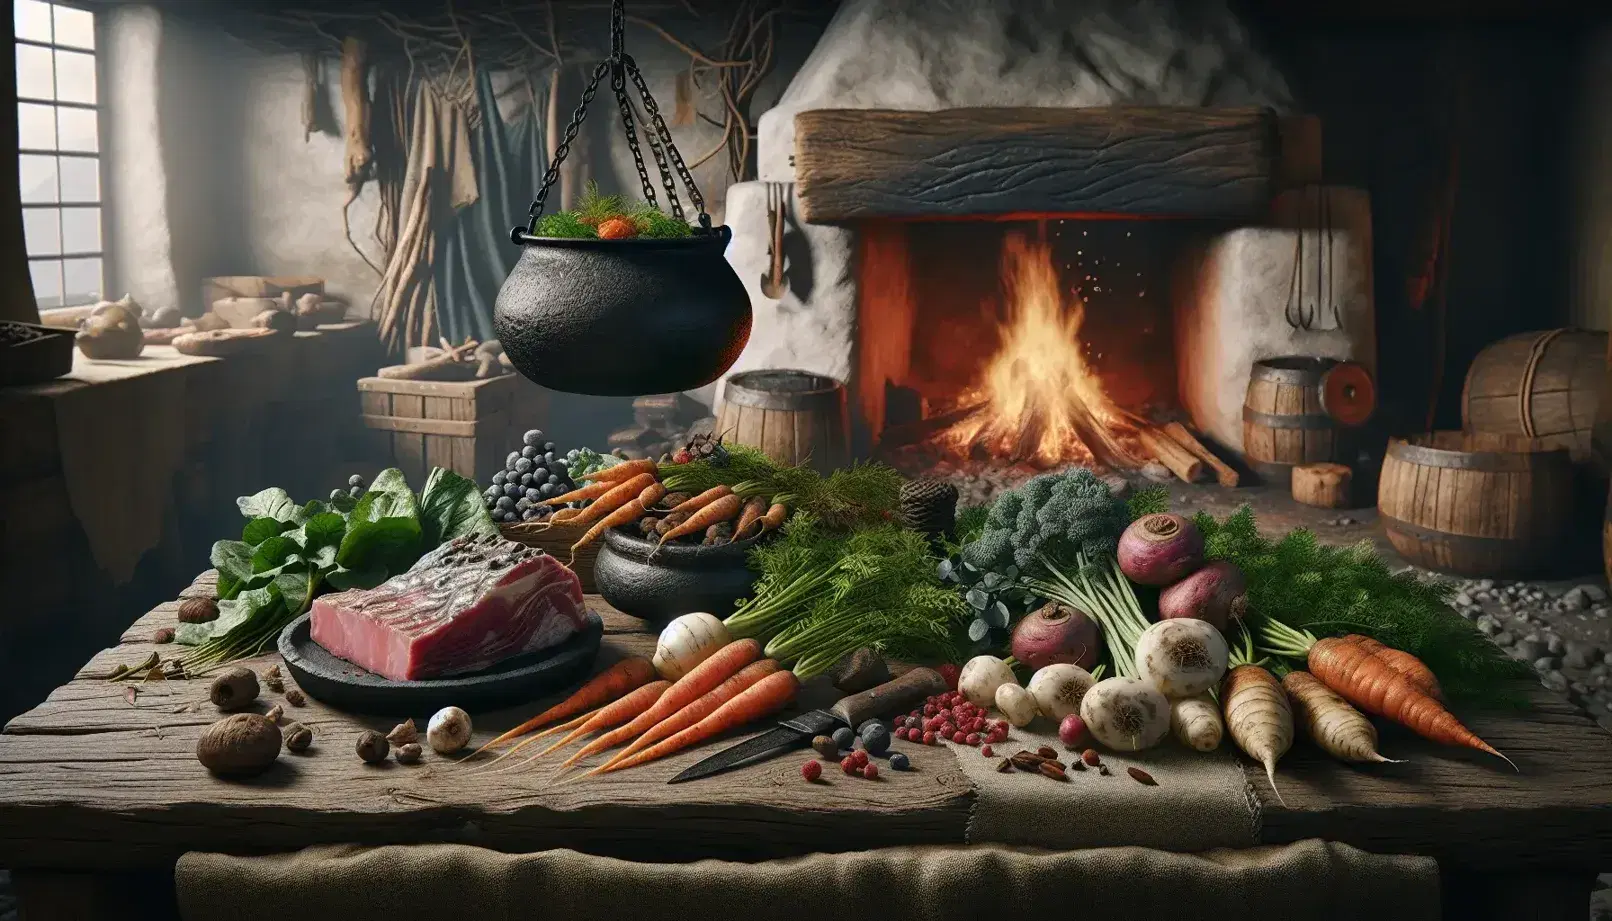 Rustic Viking kitchen with a wooden table laden with root vegetables, berries, and salted meat, a hearth with a cauldron, and a spit-roasting lamb, attended by two cooks.